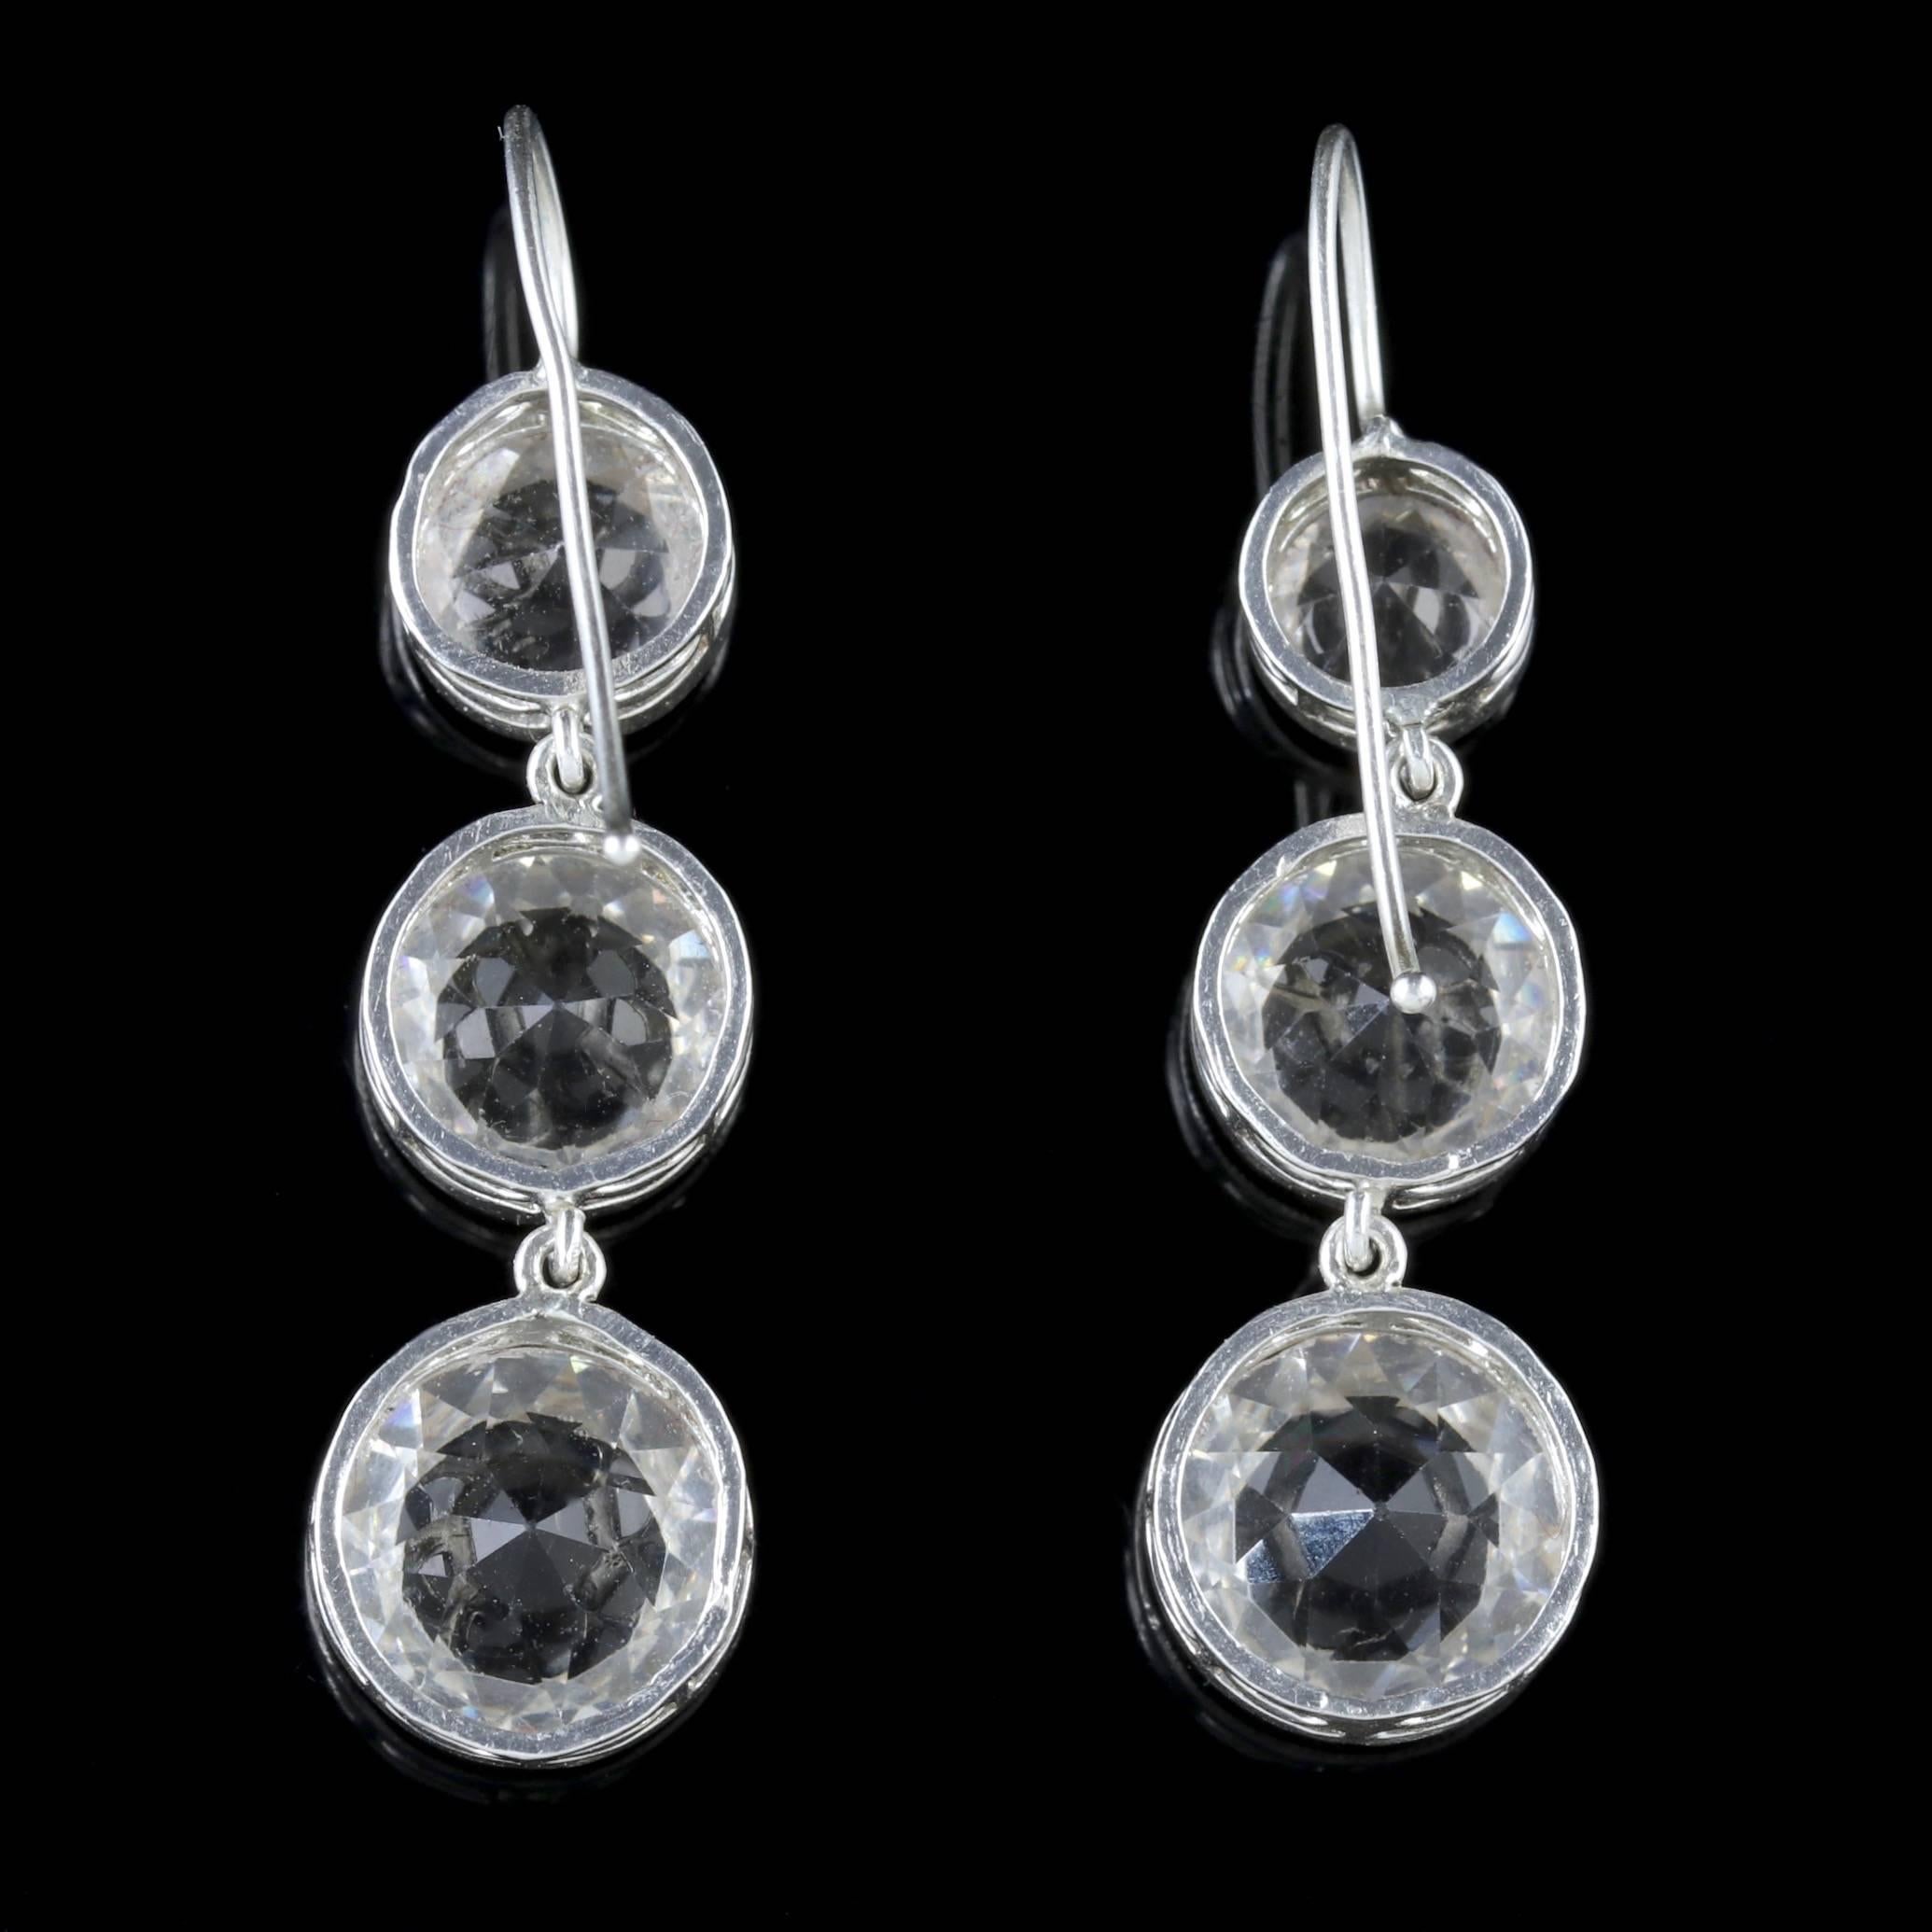 To read more please click continue reading below-

These fabulous long antique Sterling Silver, old cut Paste earrings were made during the Edwardian period, Circa 1915.

Each earring is adorned with three sparkling white, old Cut Paste stones which